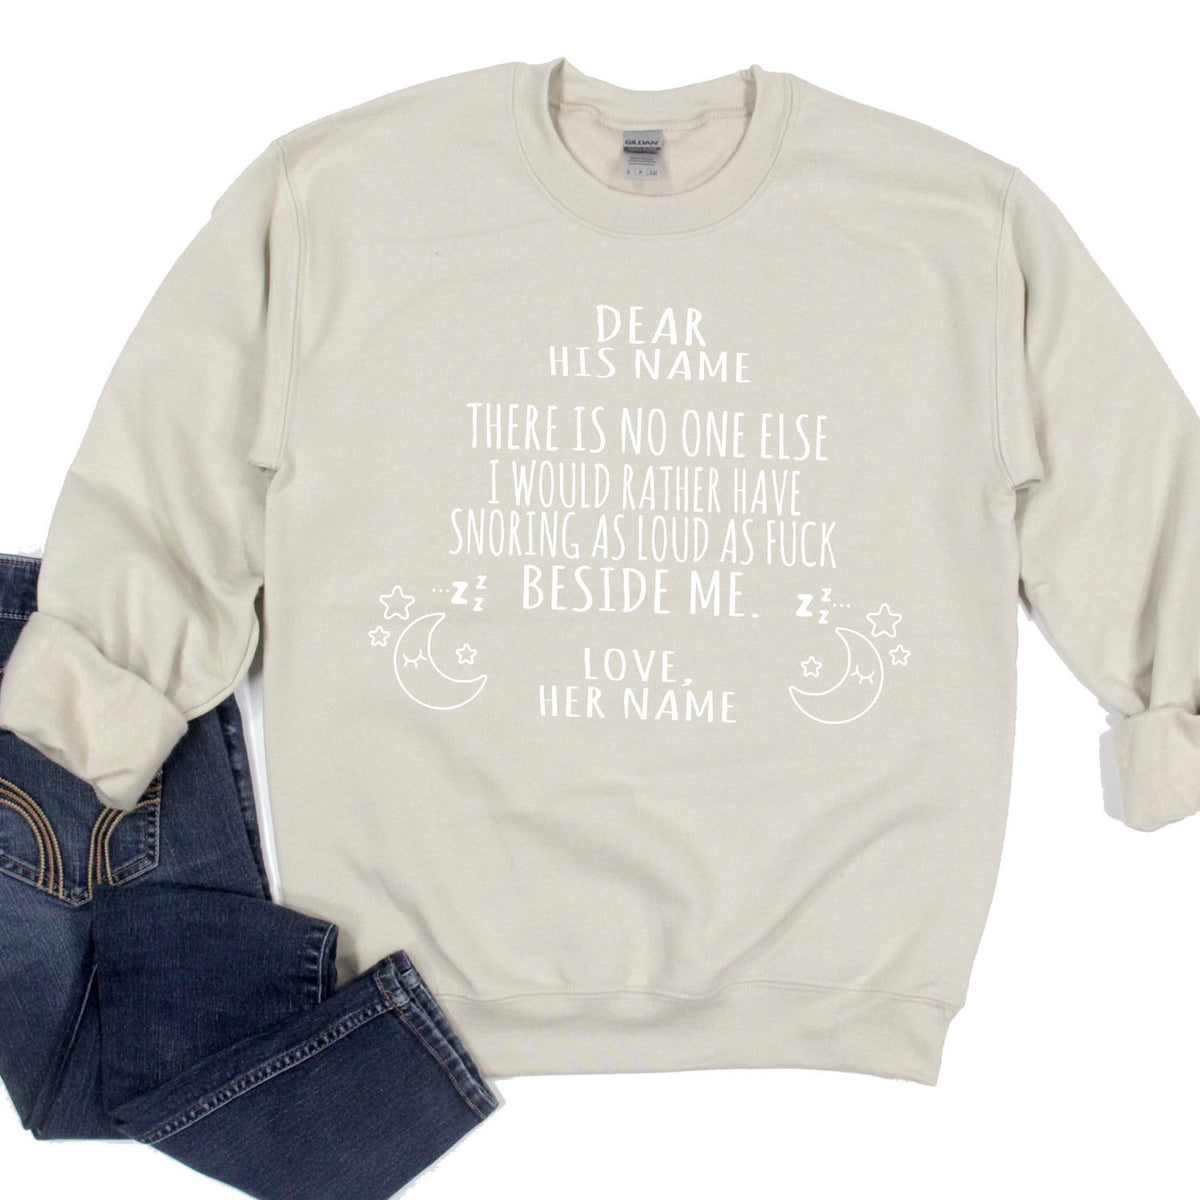 There is No One Else I Would Rather Have Snoring As Loud As Fuck Beside Me - Long Sleeve Heavy Crewneck Sweatshirt